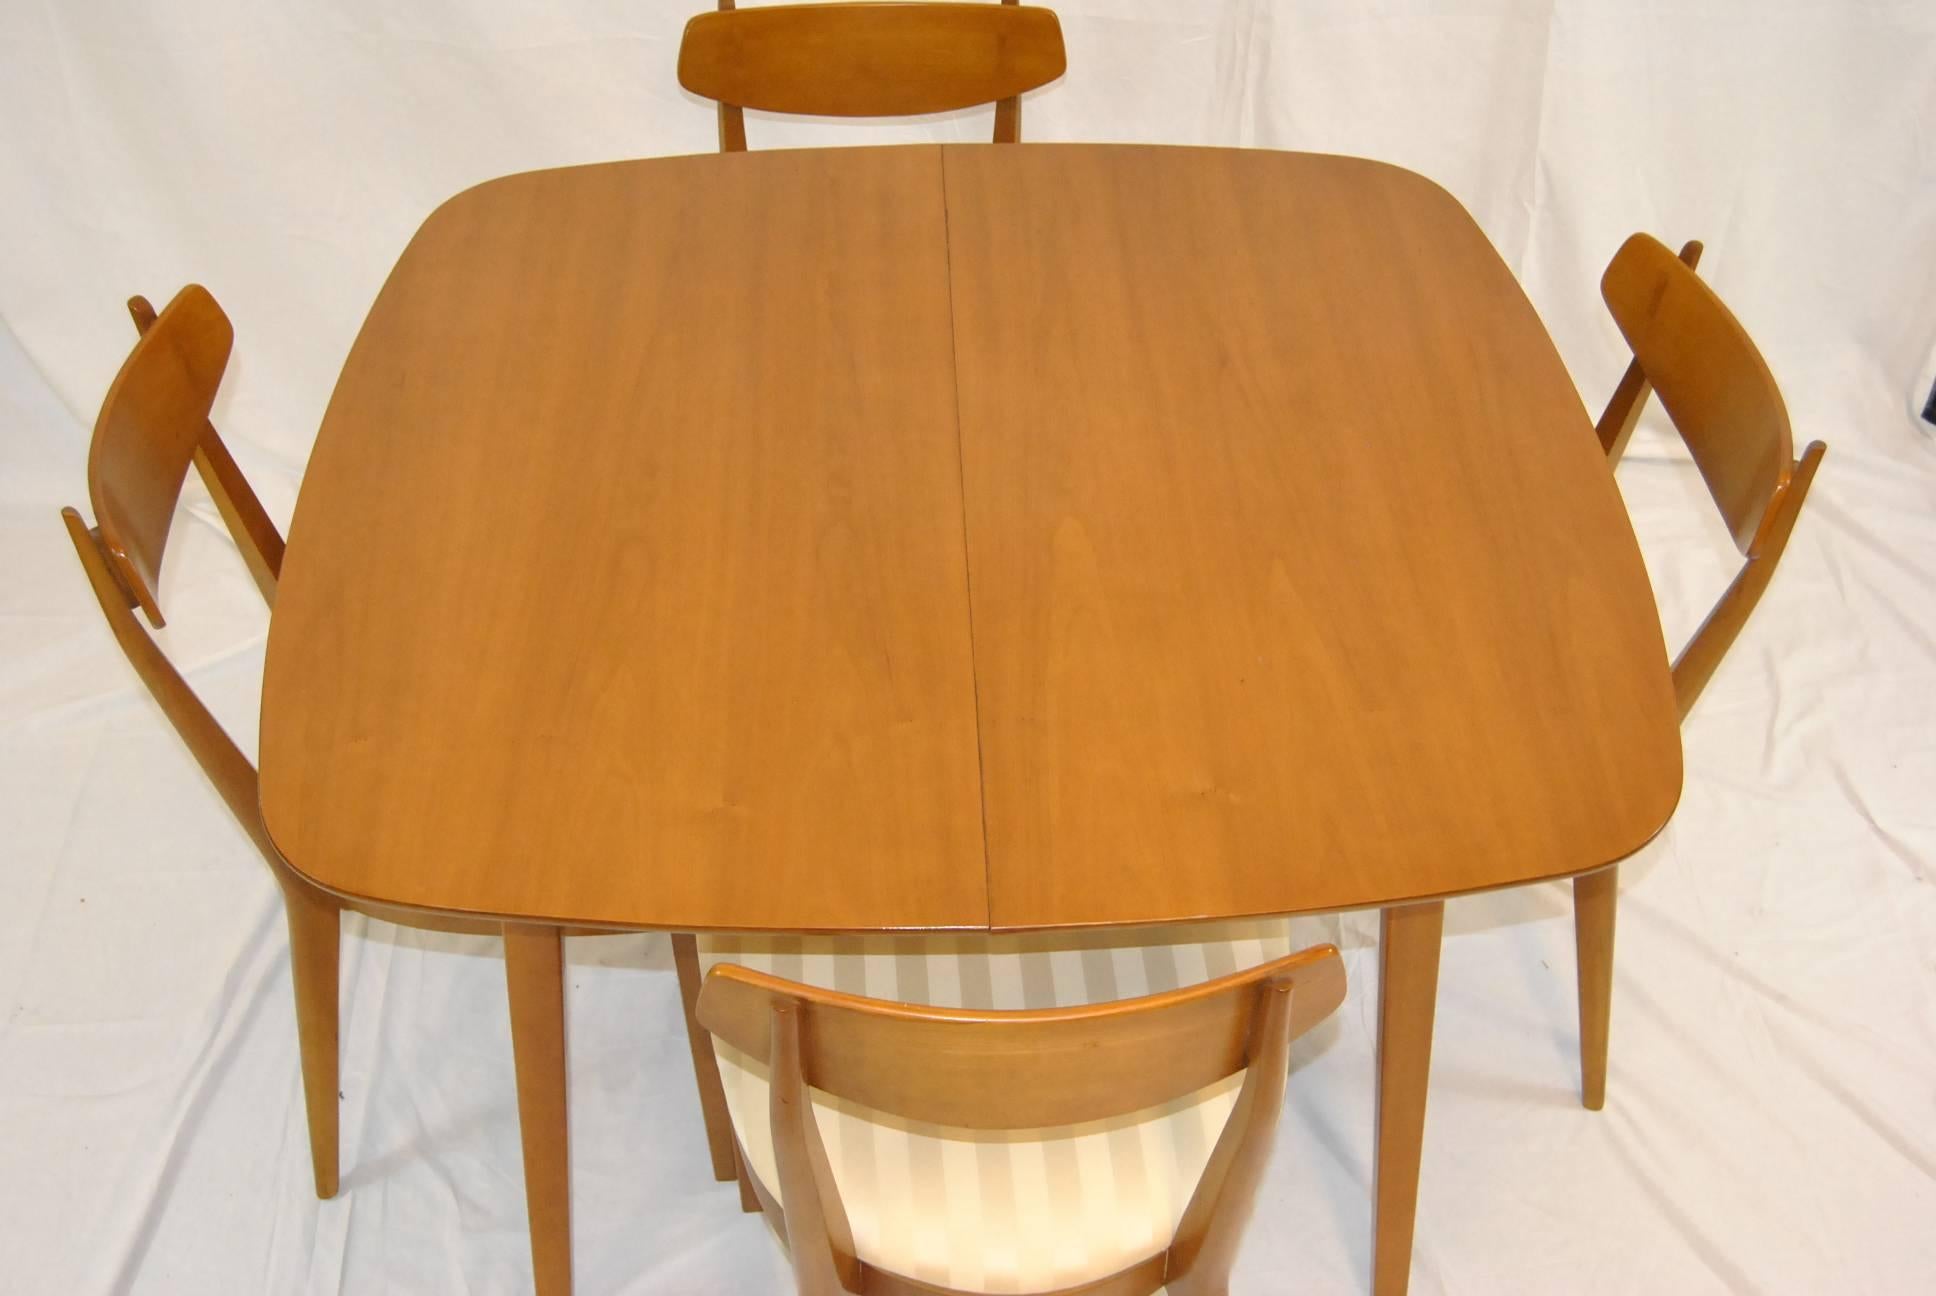 A great Mid-Century Modern dining set in cherry designed by Kipp Stewart for Drexel.  This is the Sun Coast Collection dining set and it includes a 44" square table with two 20" leafs (1 skirted, 1 unskirted) and four side chairs.  Chairs